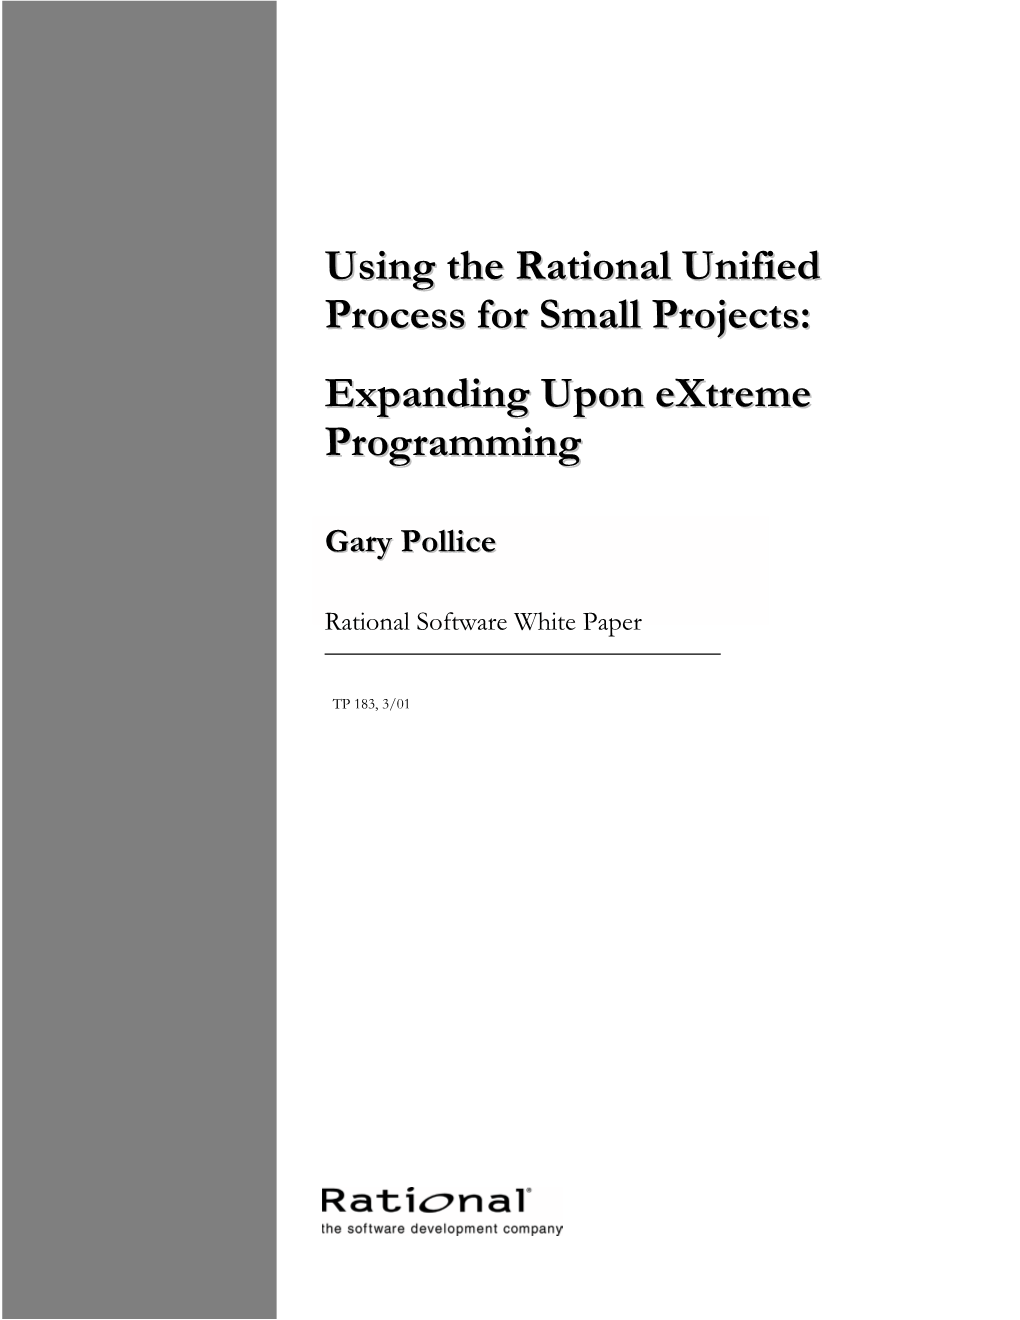 Using the Rational Unified Process for Small Projects: Expanding Upon Extreme Programming